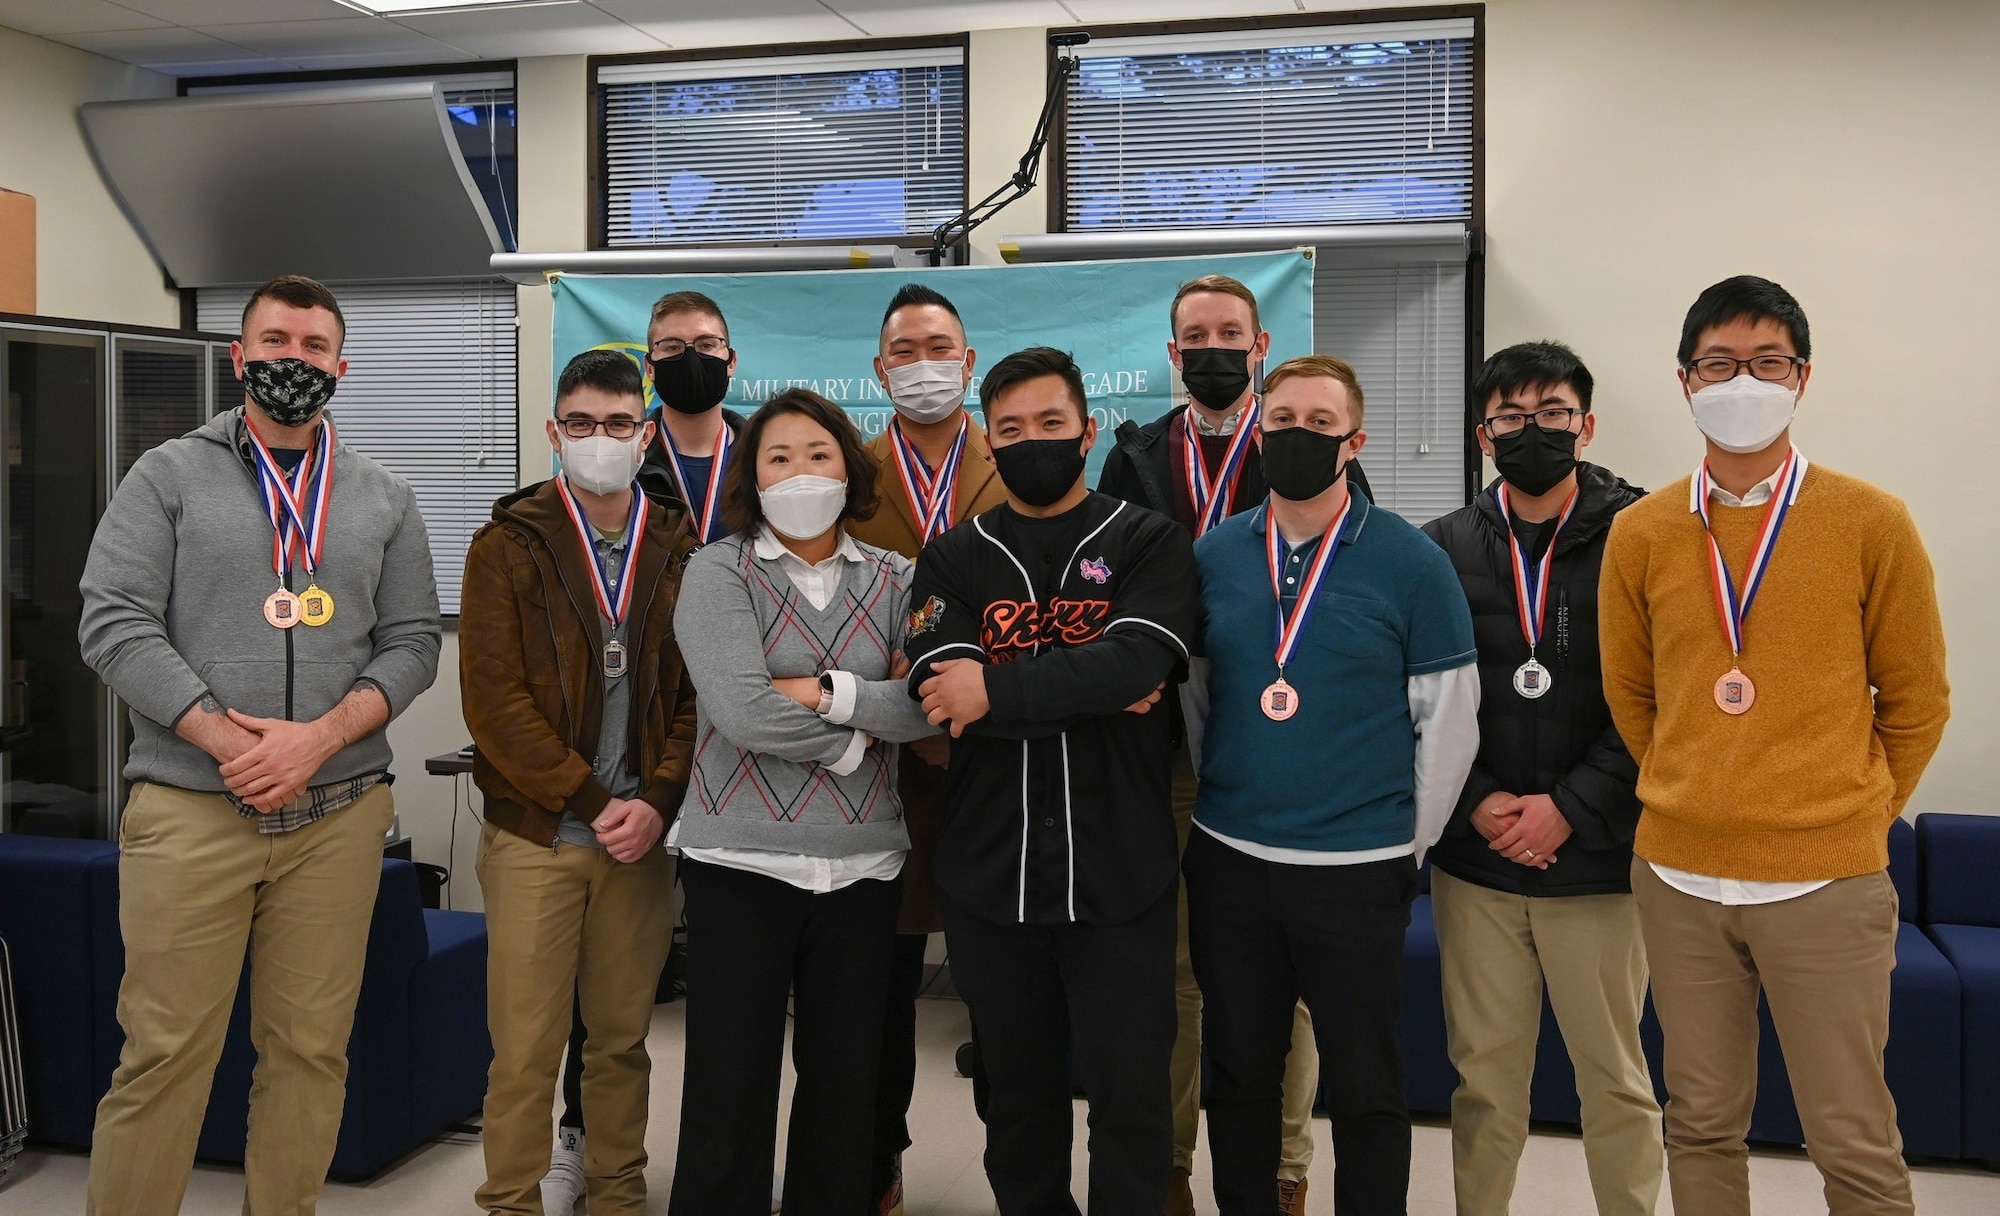 Participants of the 9th annual Korean language competition pose for a photo December 3, 2021, at U.S. Army Garrison Camp Humphreys, Republic of Korea. The Air Force took home nine of the 12 medals and won overall. (U.S. Air Force photo by Senior Airman Nicole Molignano)